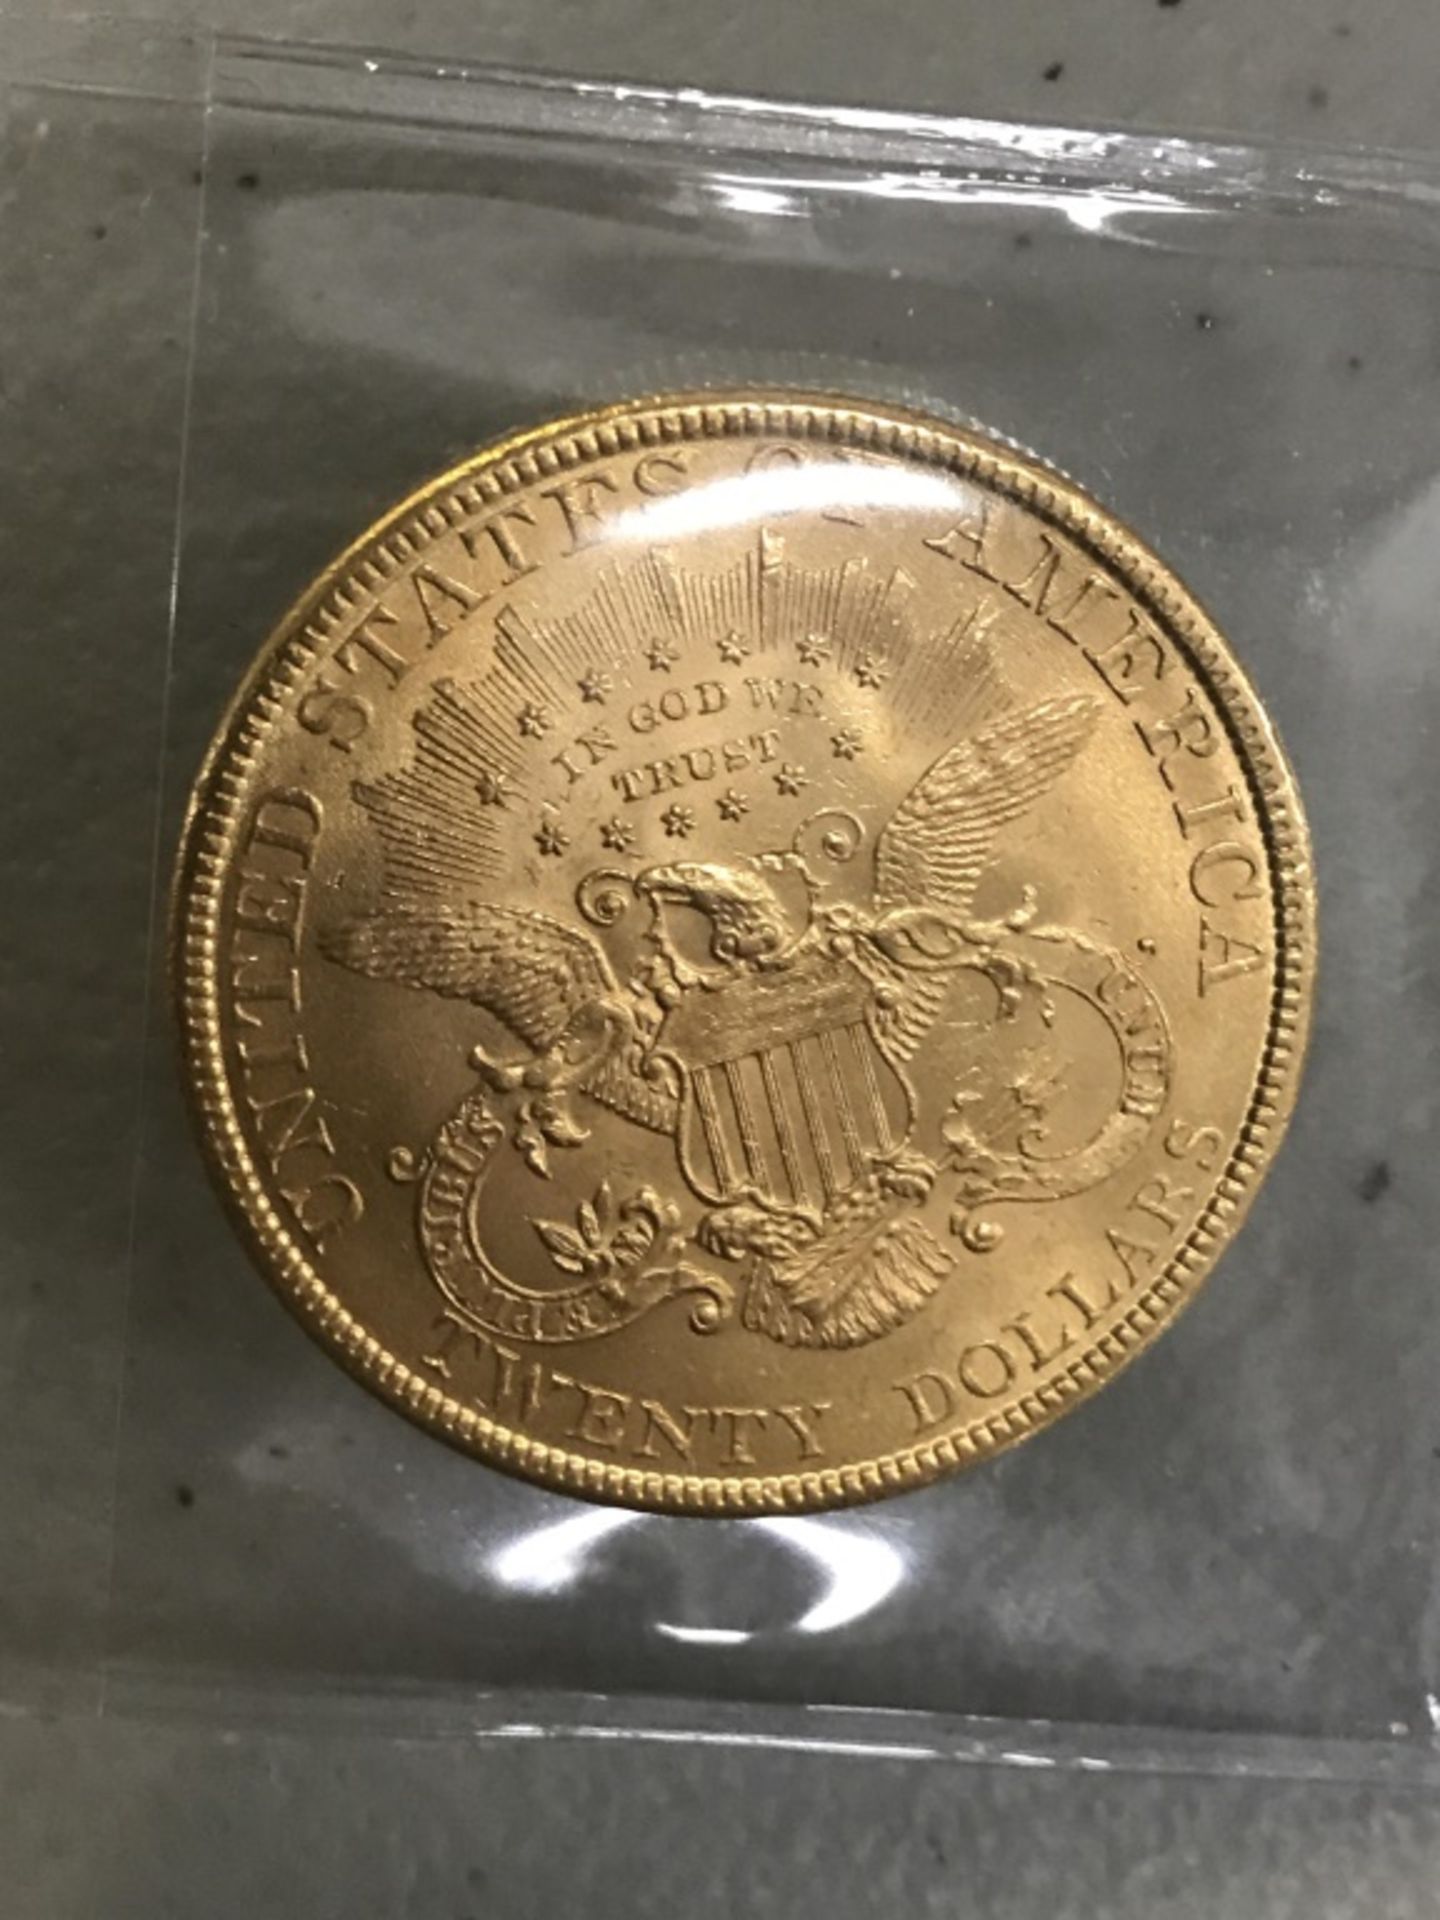 $20 US Gold 1895 Coin - Image 6 of 9